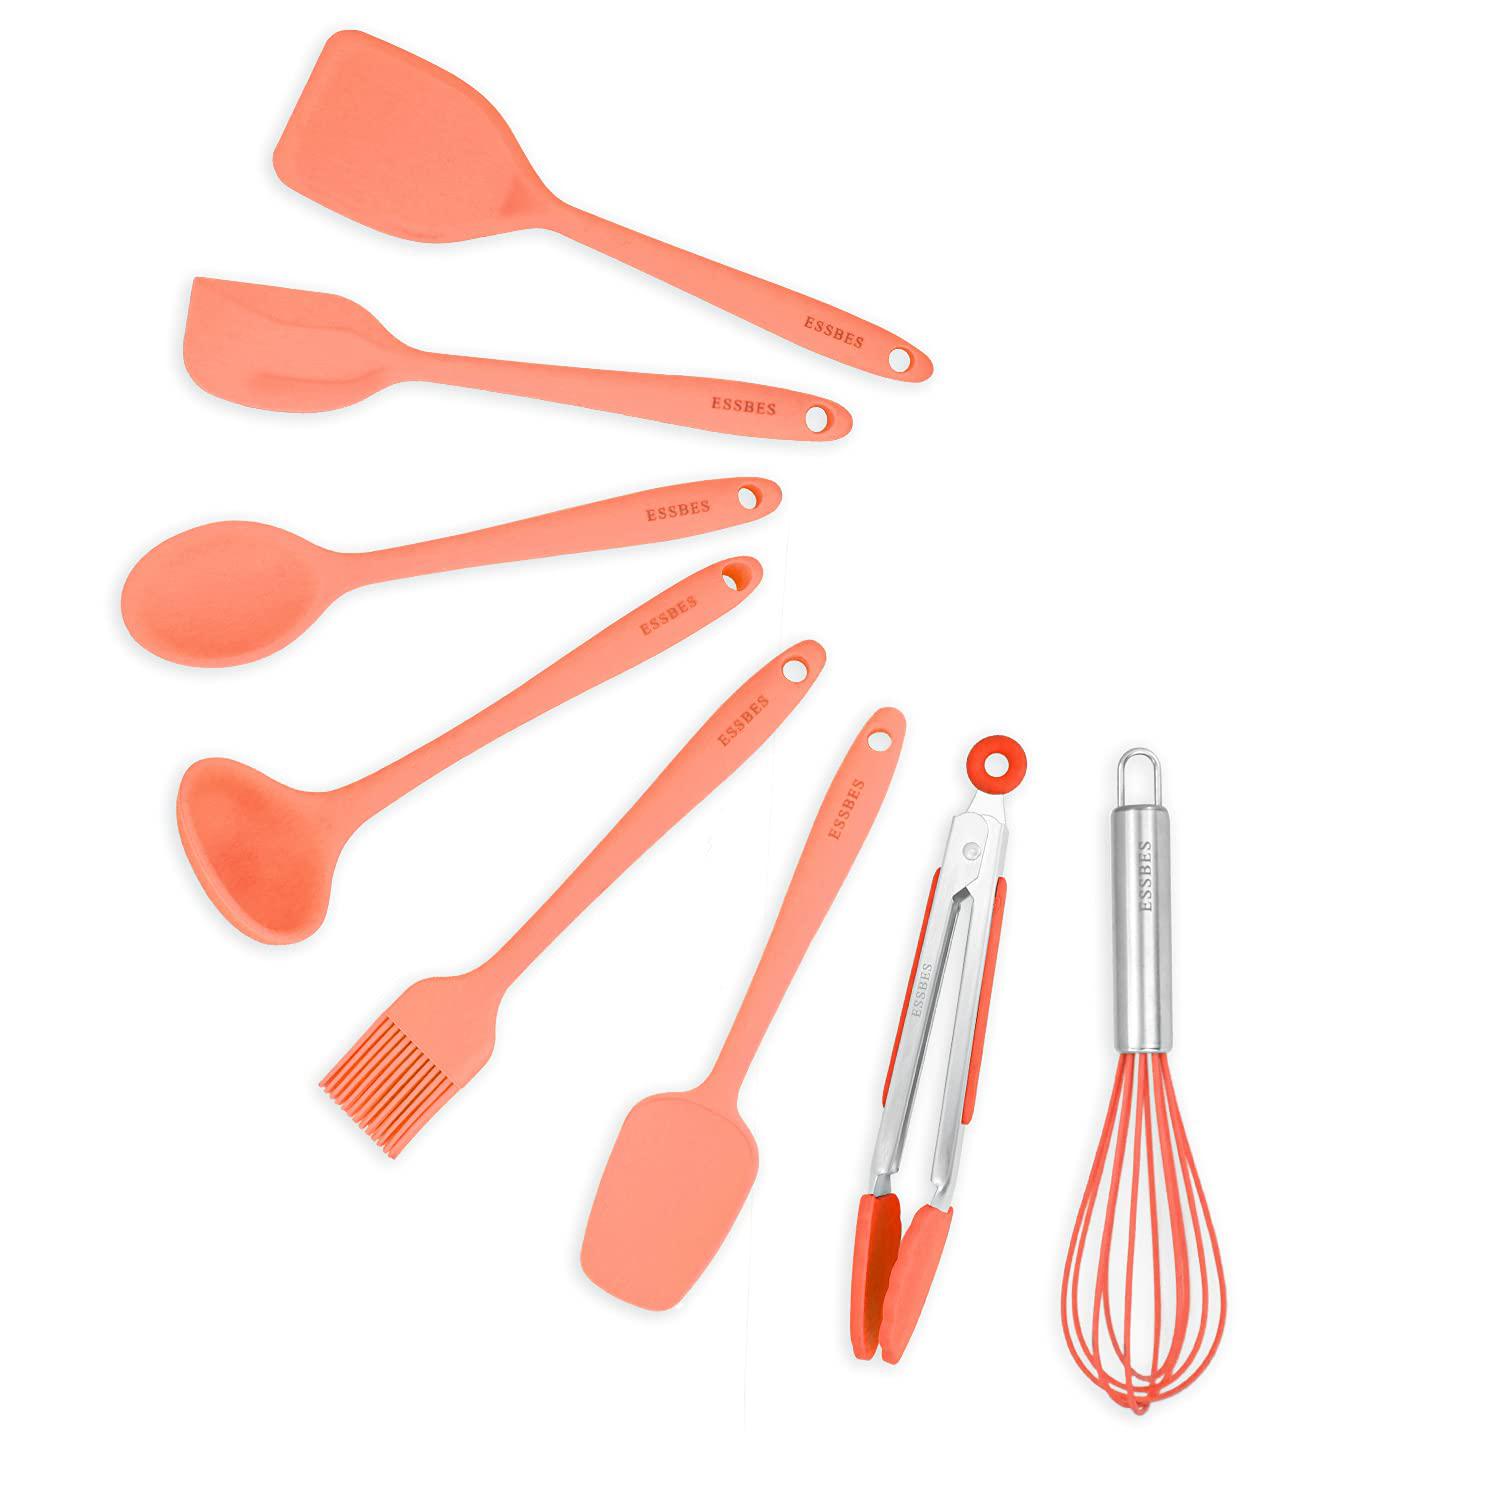 essbes silicone mini kitchen utensils set of 8 small kitchen tools nonstick cookware with hanging hole (orange)